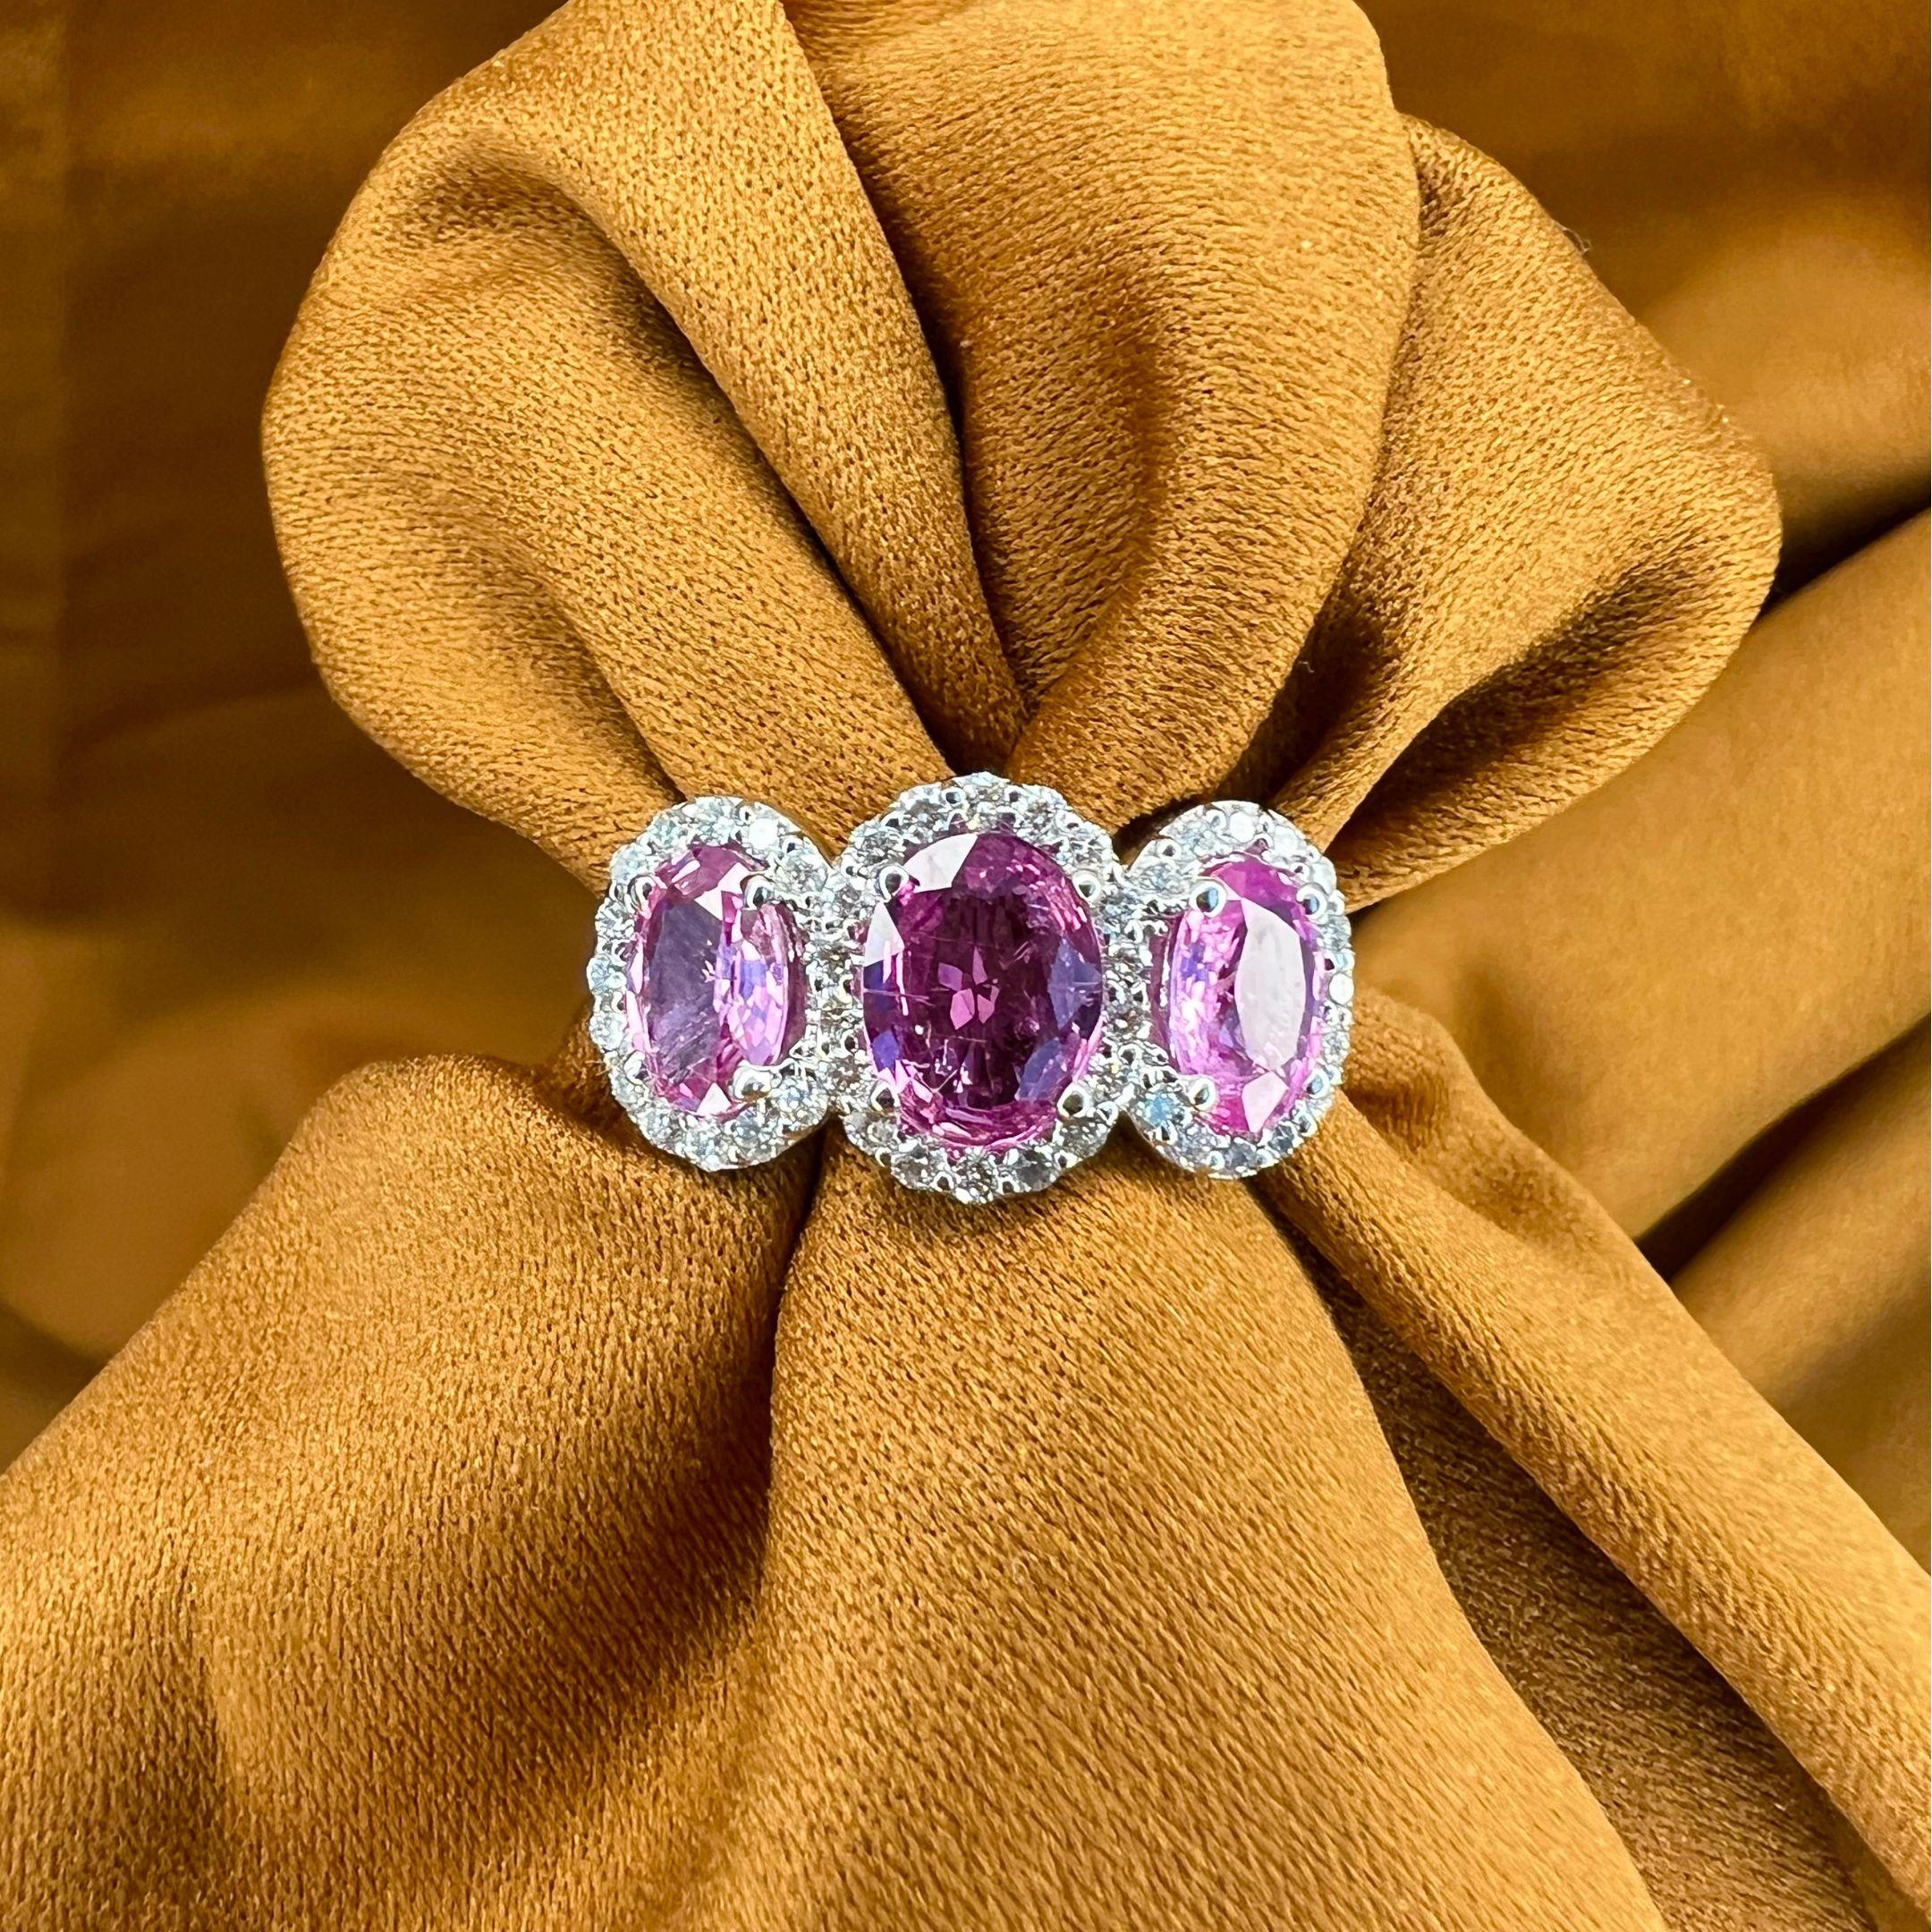 Sapphire Weight: 2.71 CTs
Measurements: 8x6/7x5 mm
Diamond Weight: 0.48 CTs
Metal: 18K White Gold 
Gold Weight: 5.46 gm
Ring Size: 7
Shape: Oval
Color: Pink
Hardness: 9
Birthstone: September
Product ID: MUR25317/Line 8